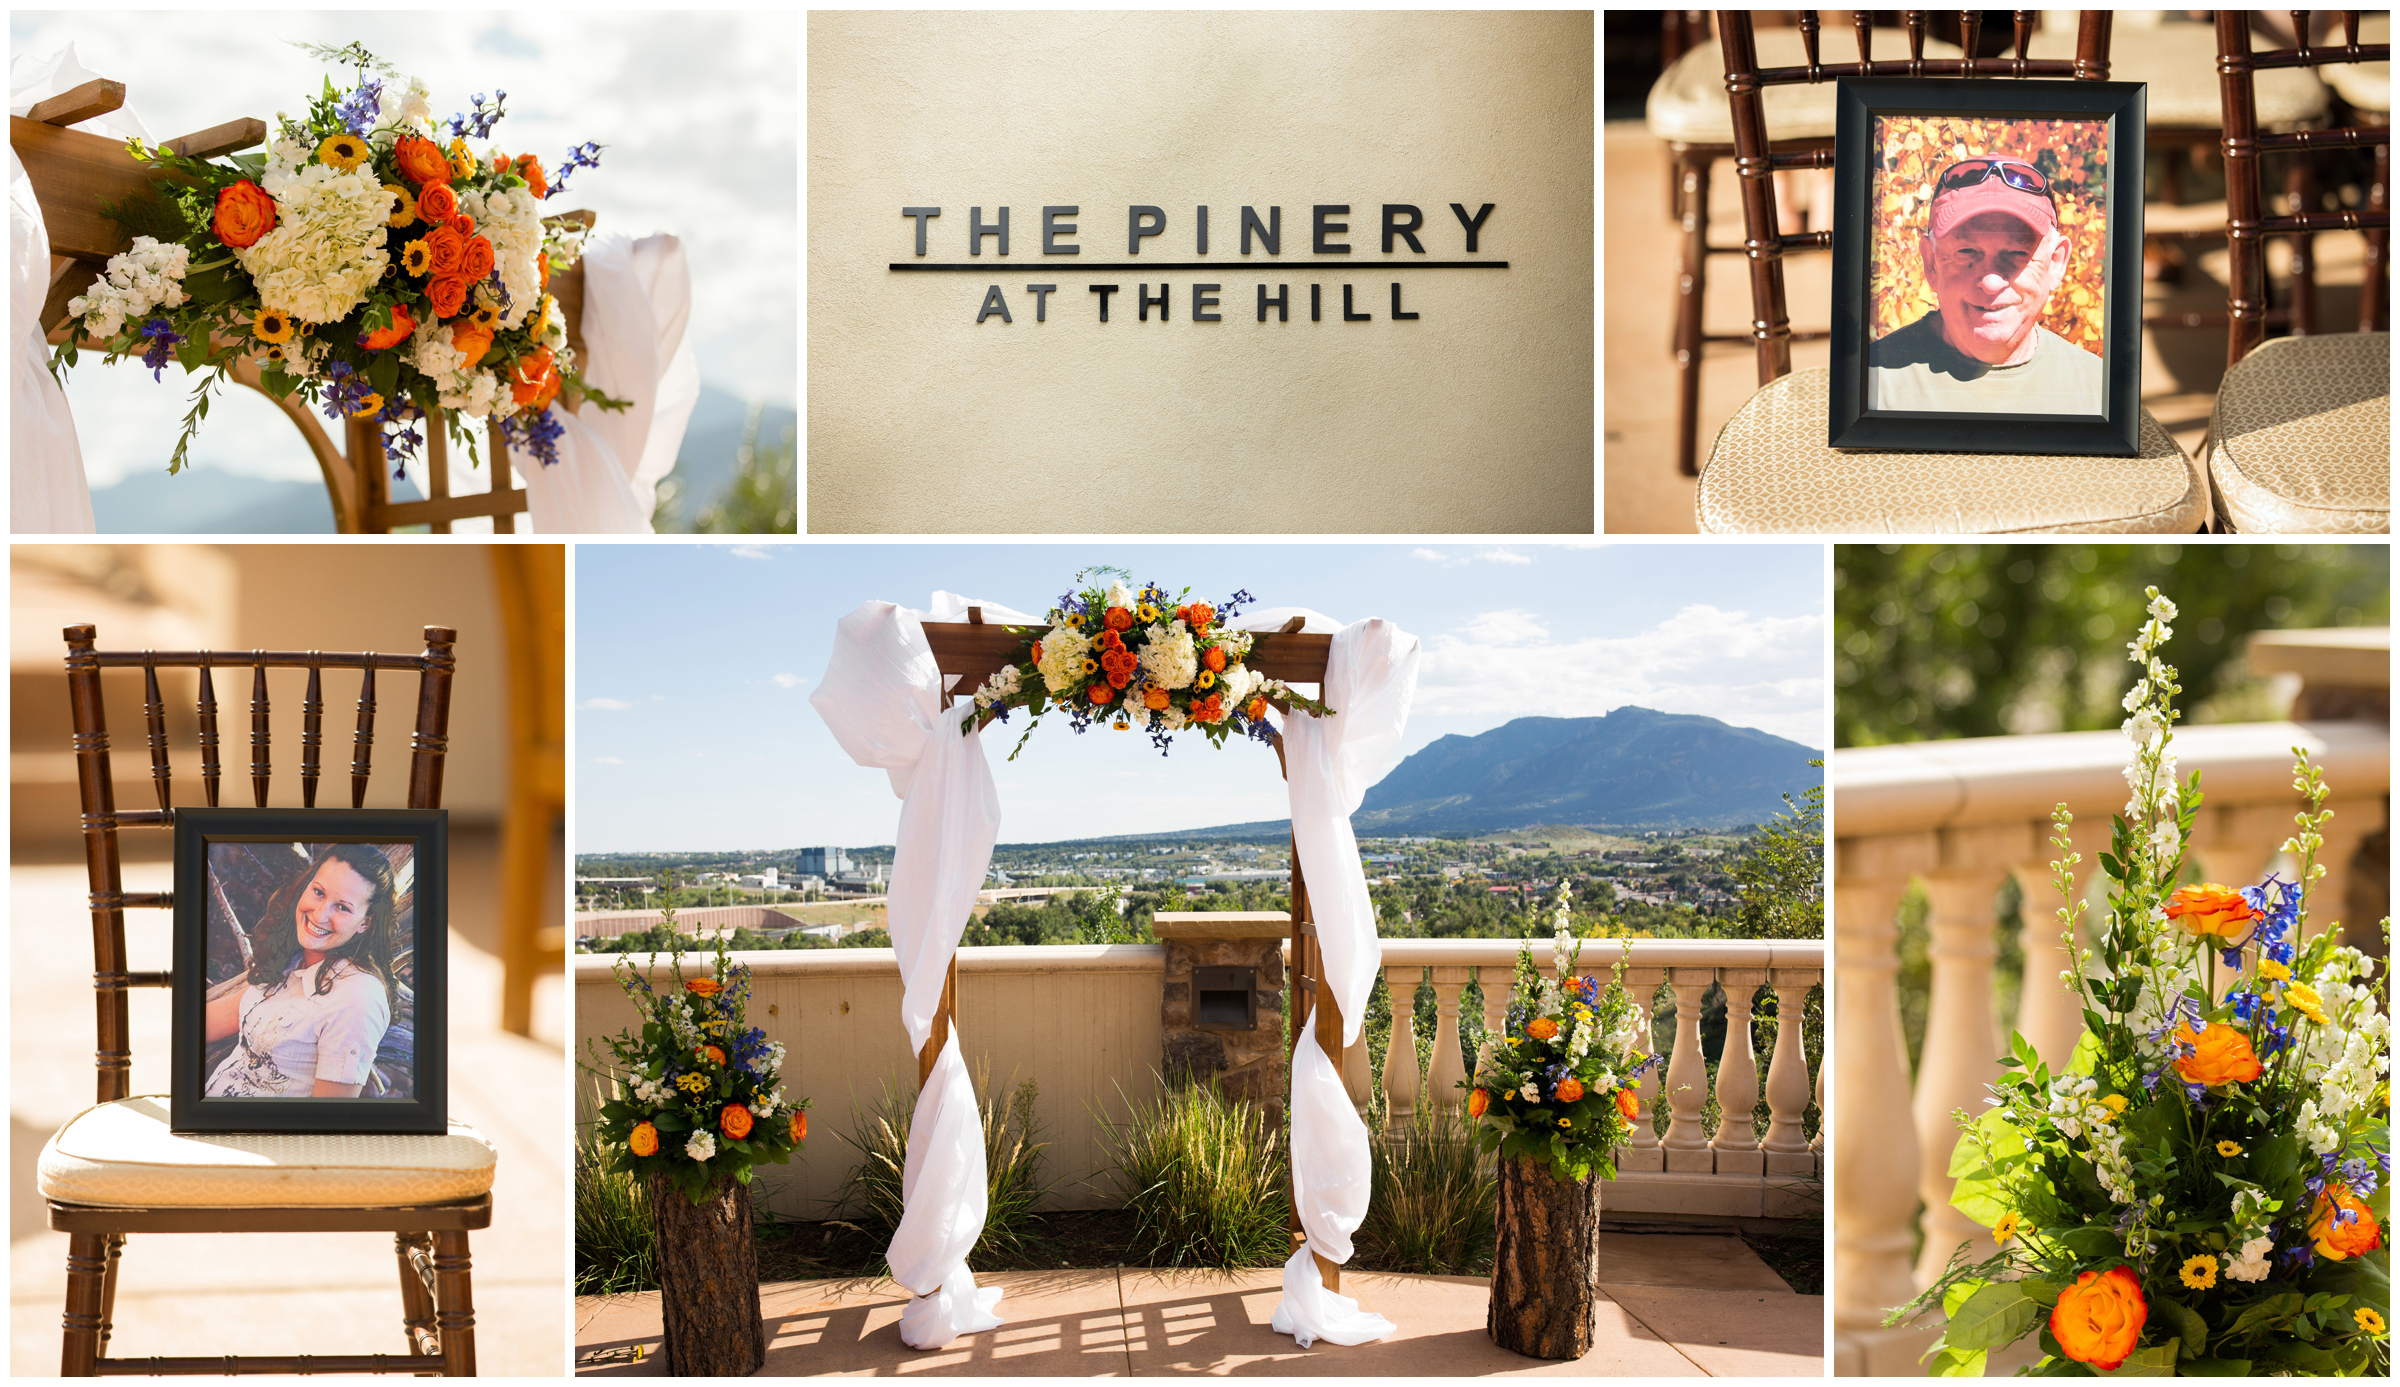 Outdoor ceremony details at Pinery at the Hill wedding 